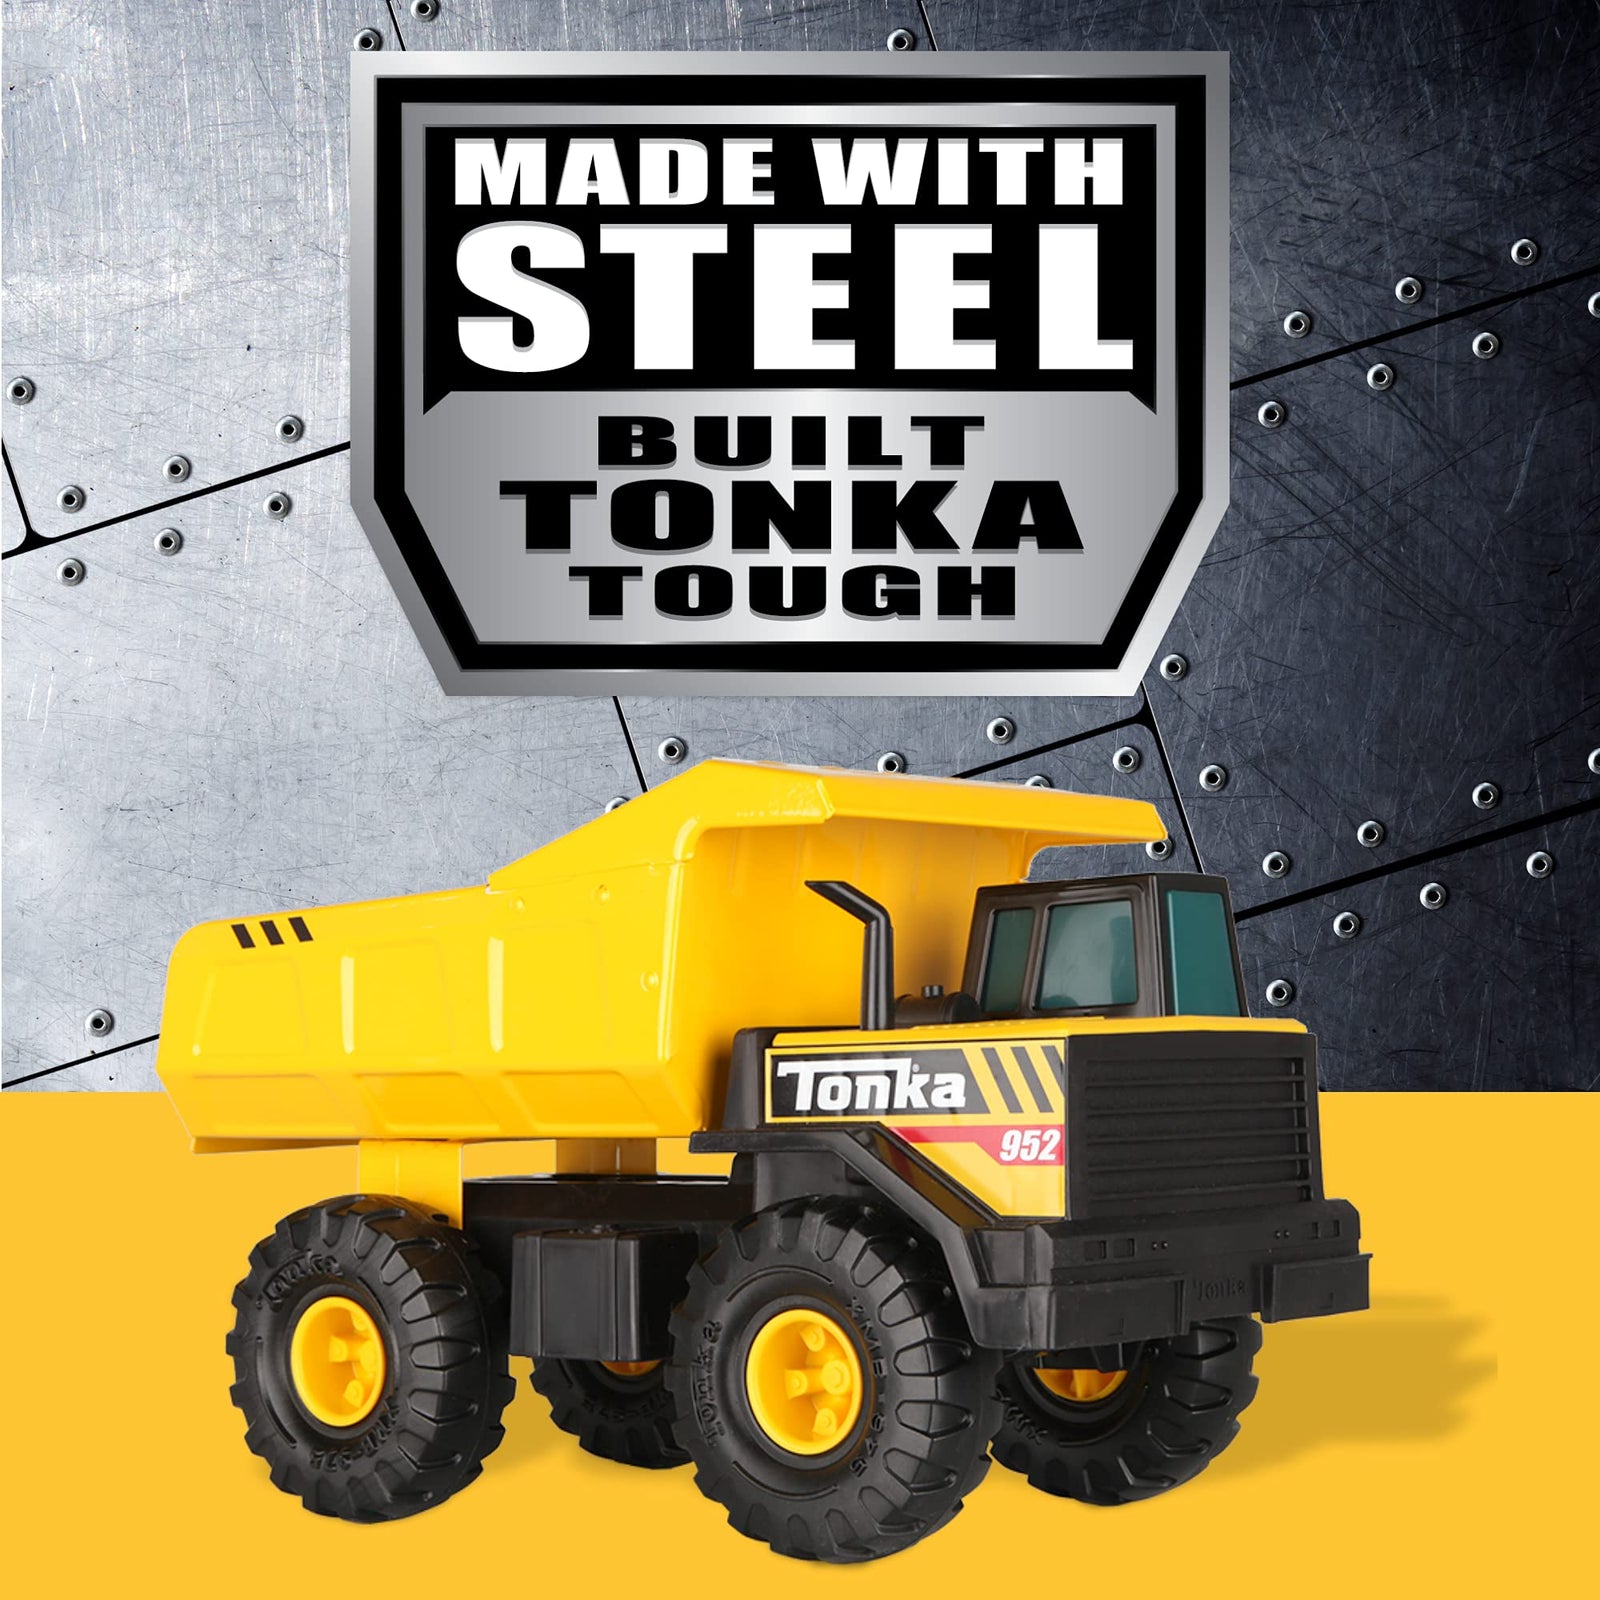 Tonka Steel Classics Mighty Dump Truck, Toy Truck, Real Steel Construction, Ages 3 and Up, Frustration-Free Packaging (FFP)